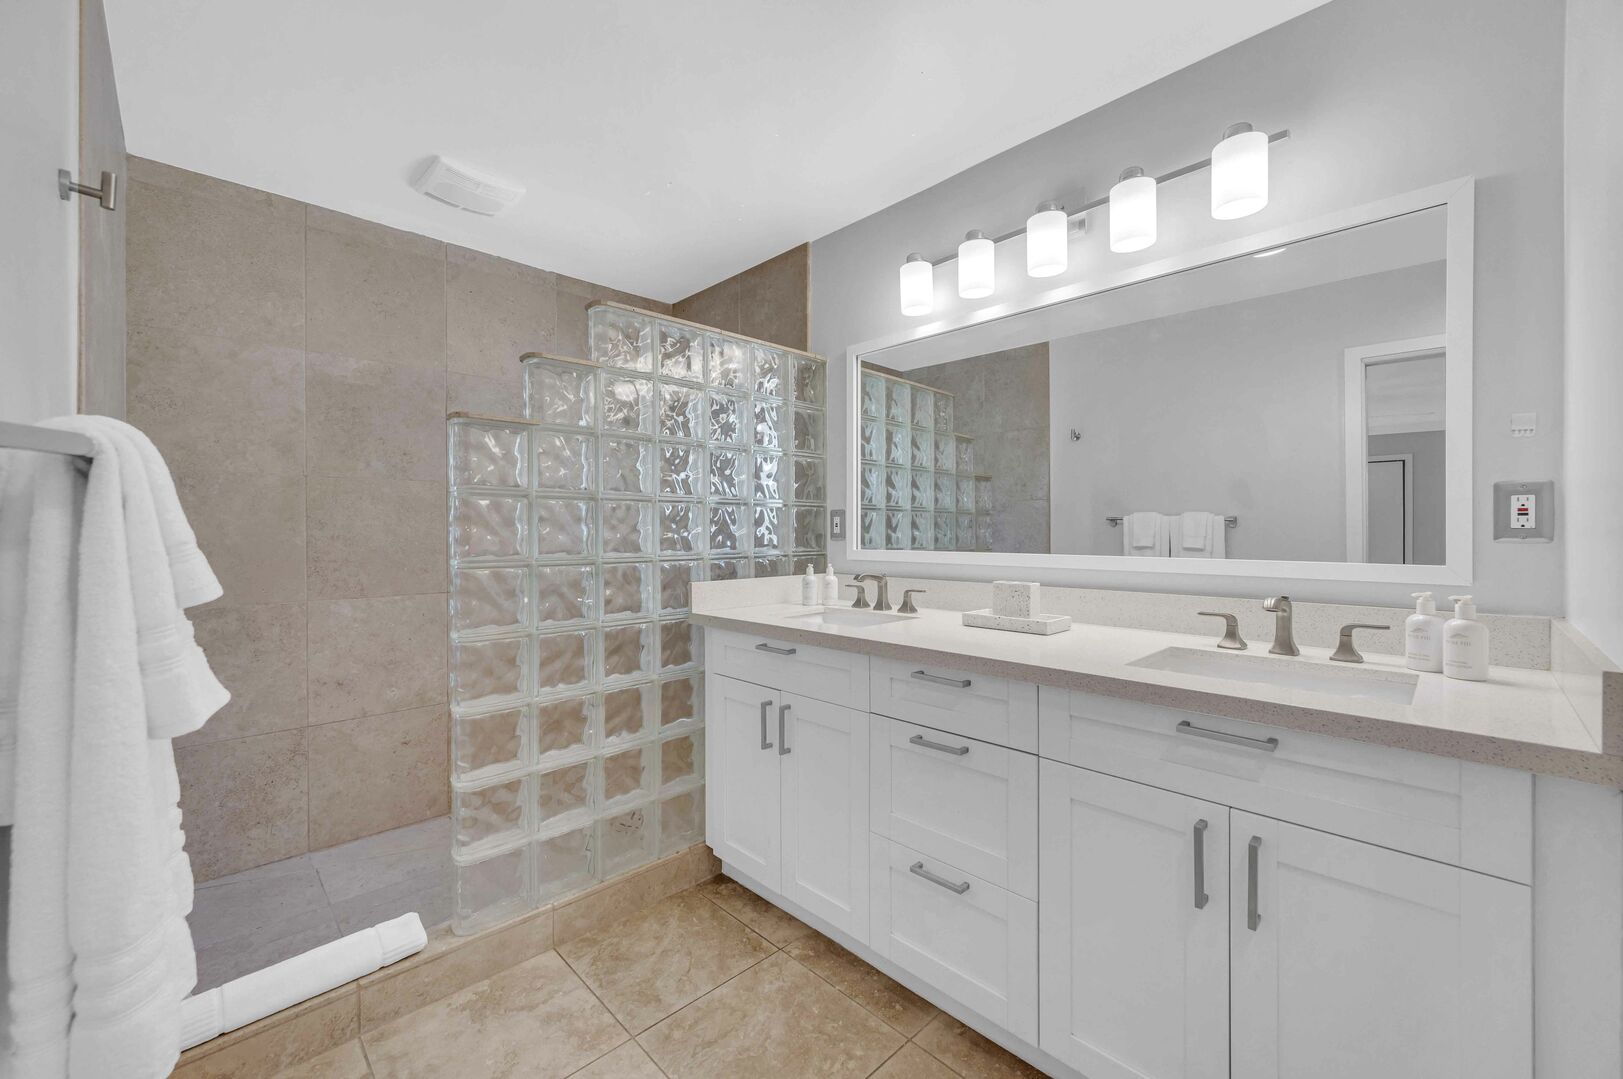 The primary bathroom features a walk-in shower and double sinks.